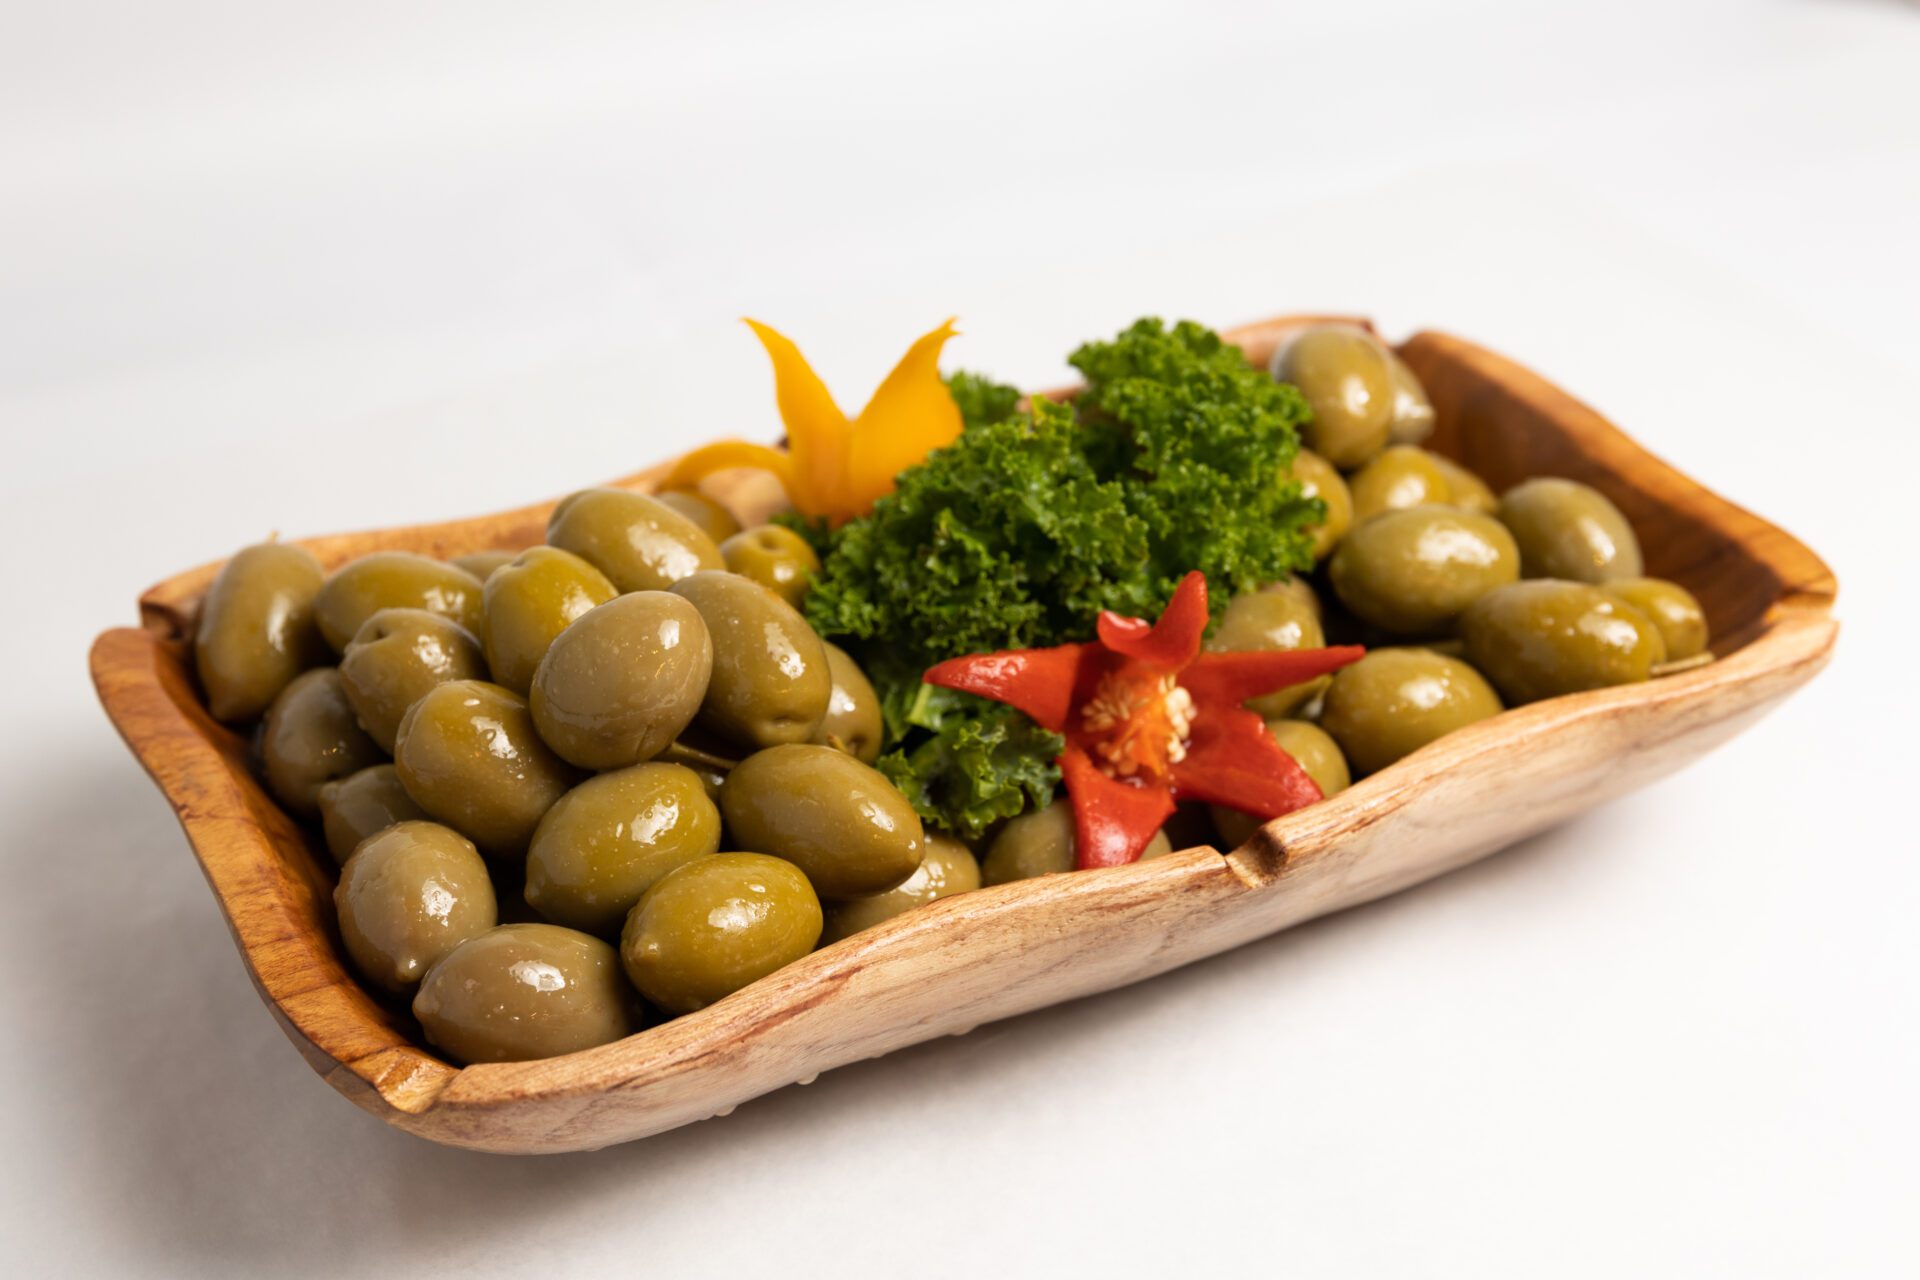 Green Whole Olives